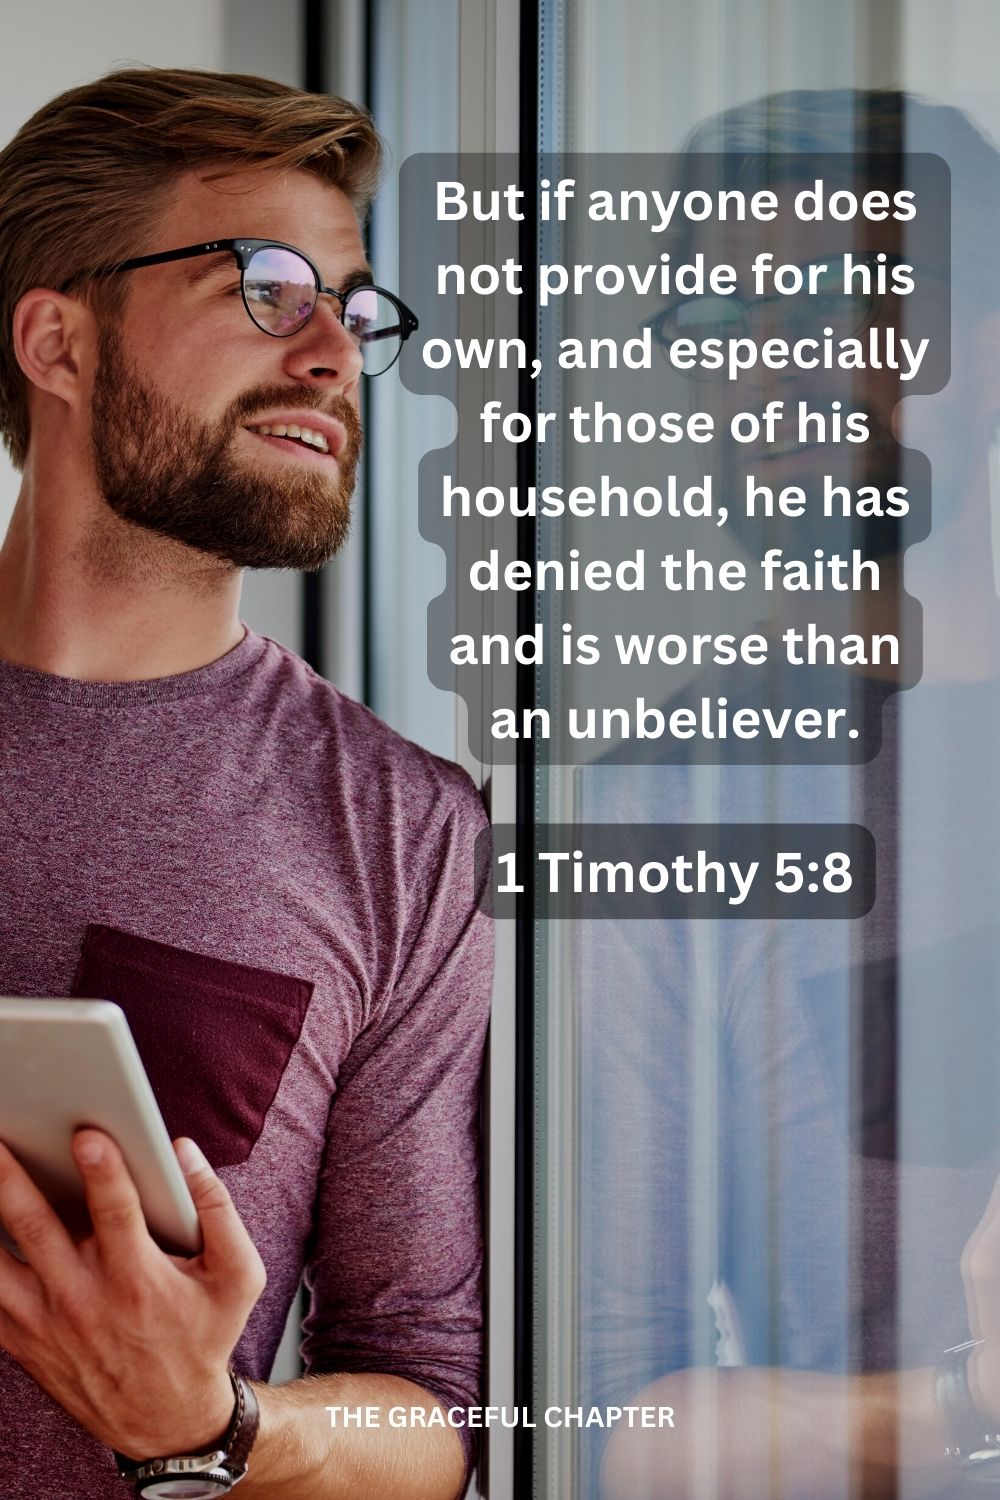 But if anyone does not provide for his own, and especially for those of his household, he has denied the faith and is worse than an unbeliever.